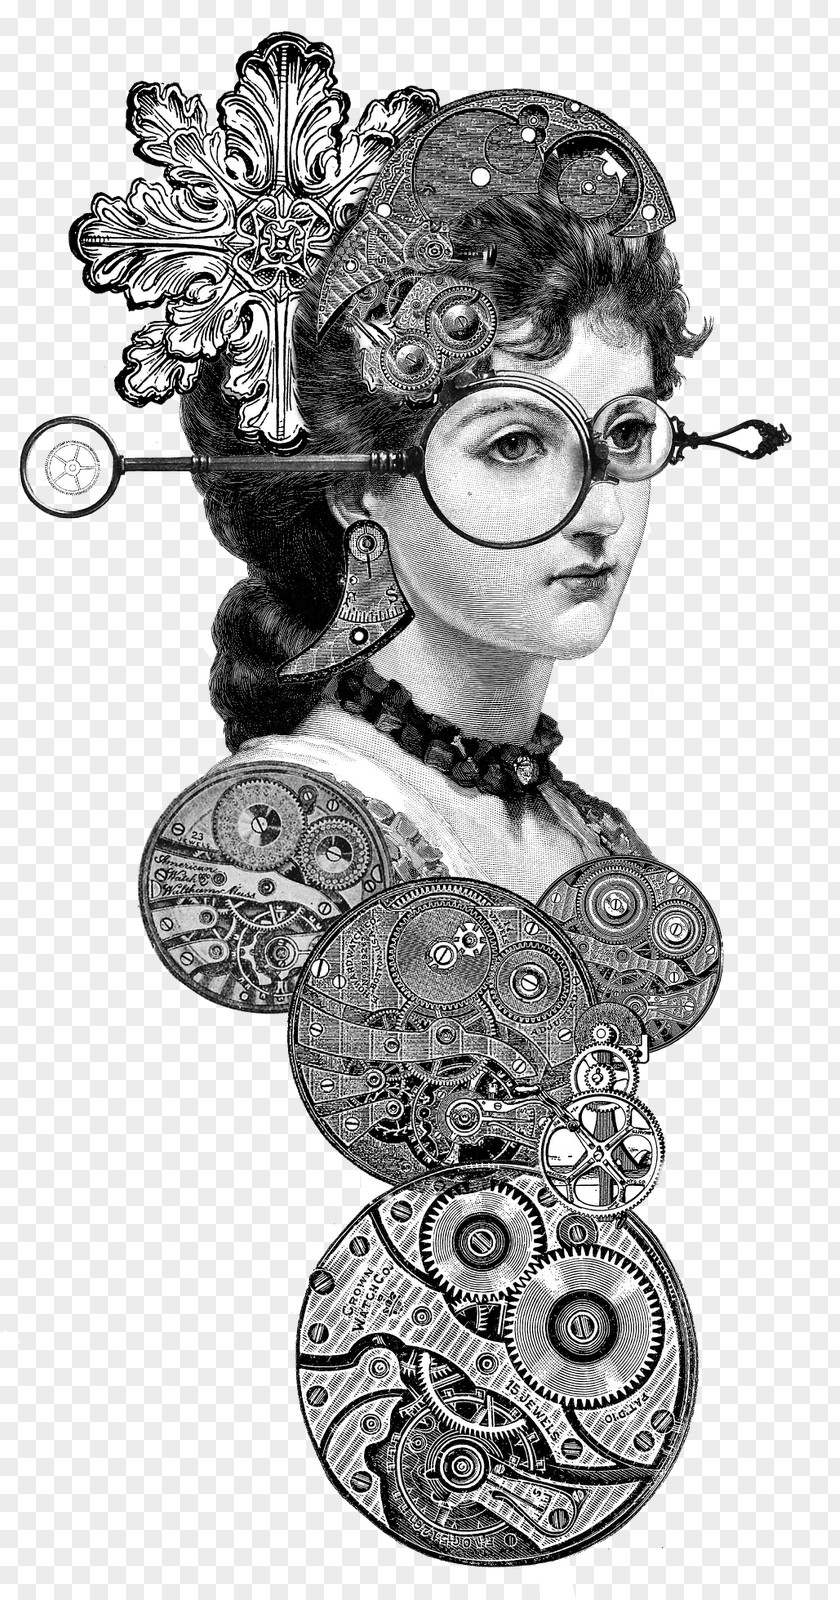 Monocle Steampunk Clip Art Drawing Free Content Lady In A Fur Wrap Illustration PNG